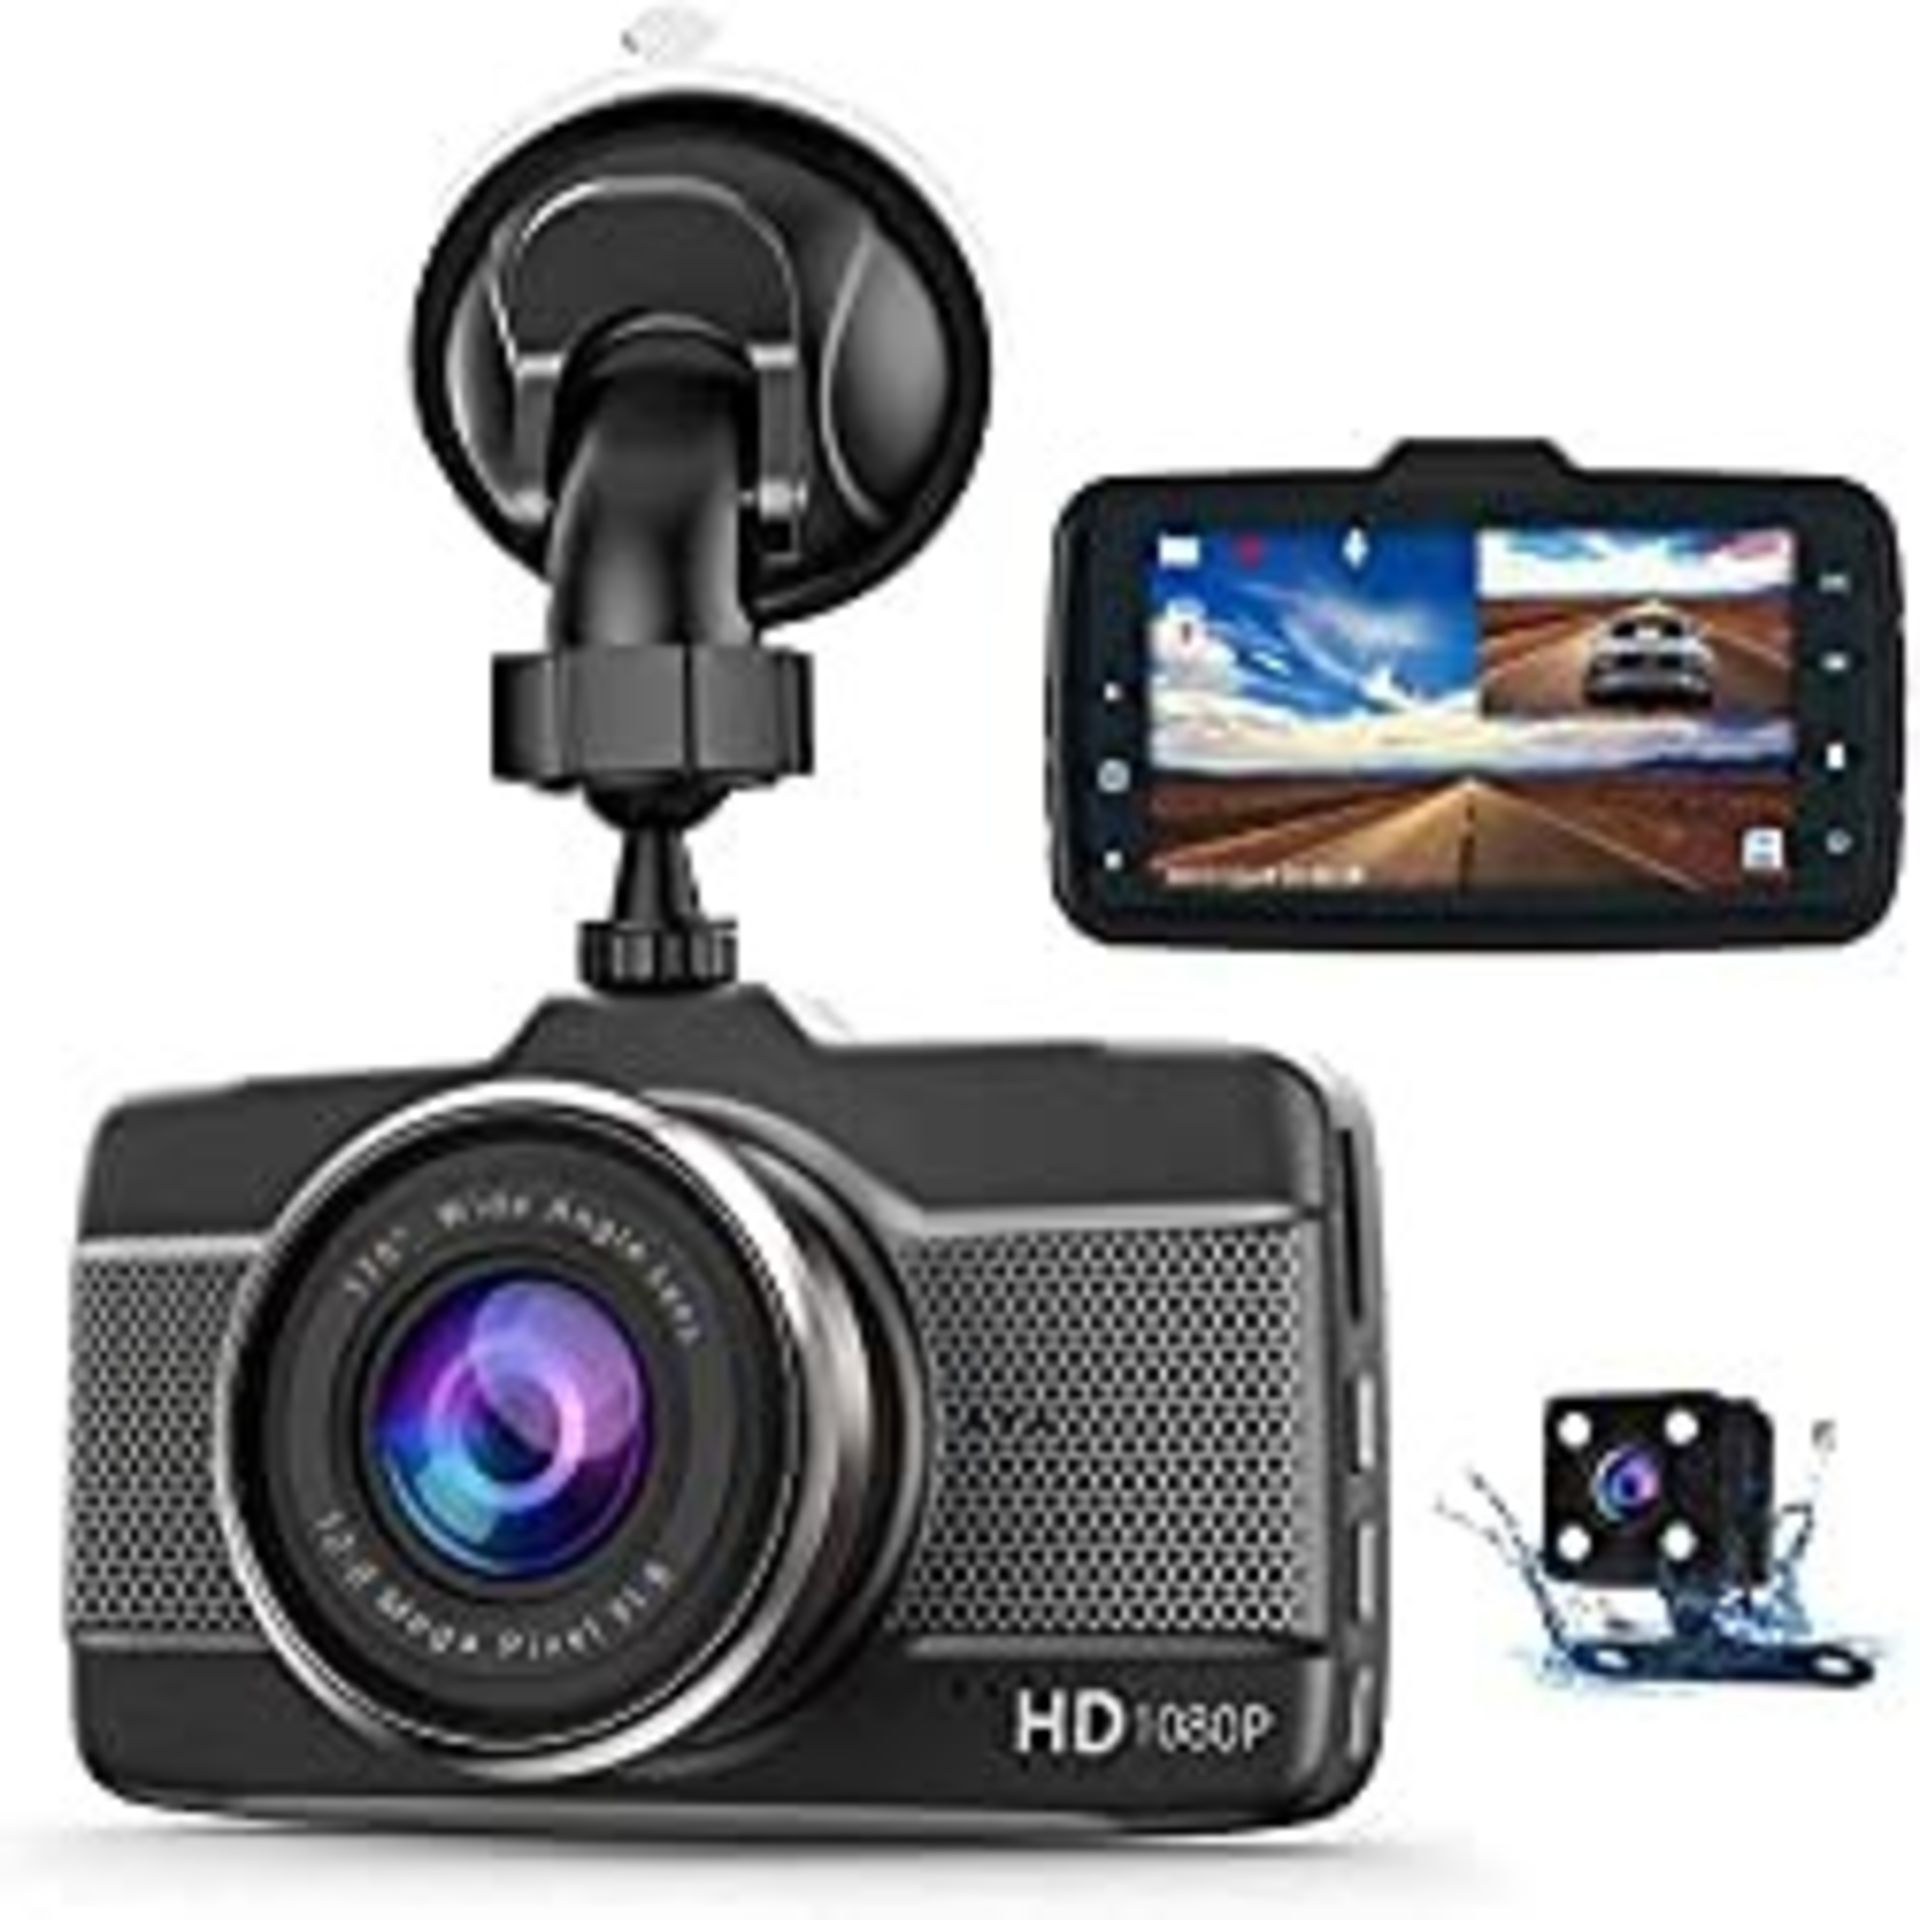 Claoner Dash Cams for Cars Front and Rear 1080P Full HD Dashcam, Dual Dash Cam with F1.8 Night